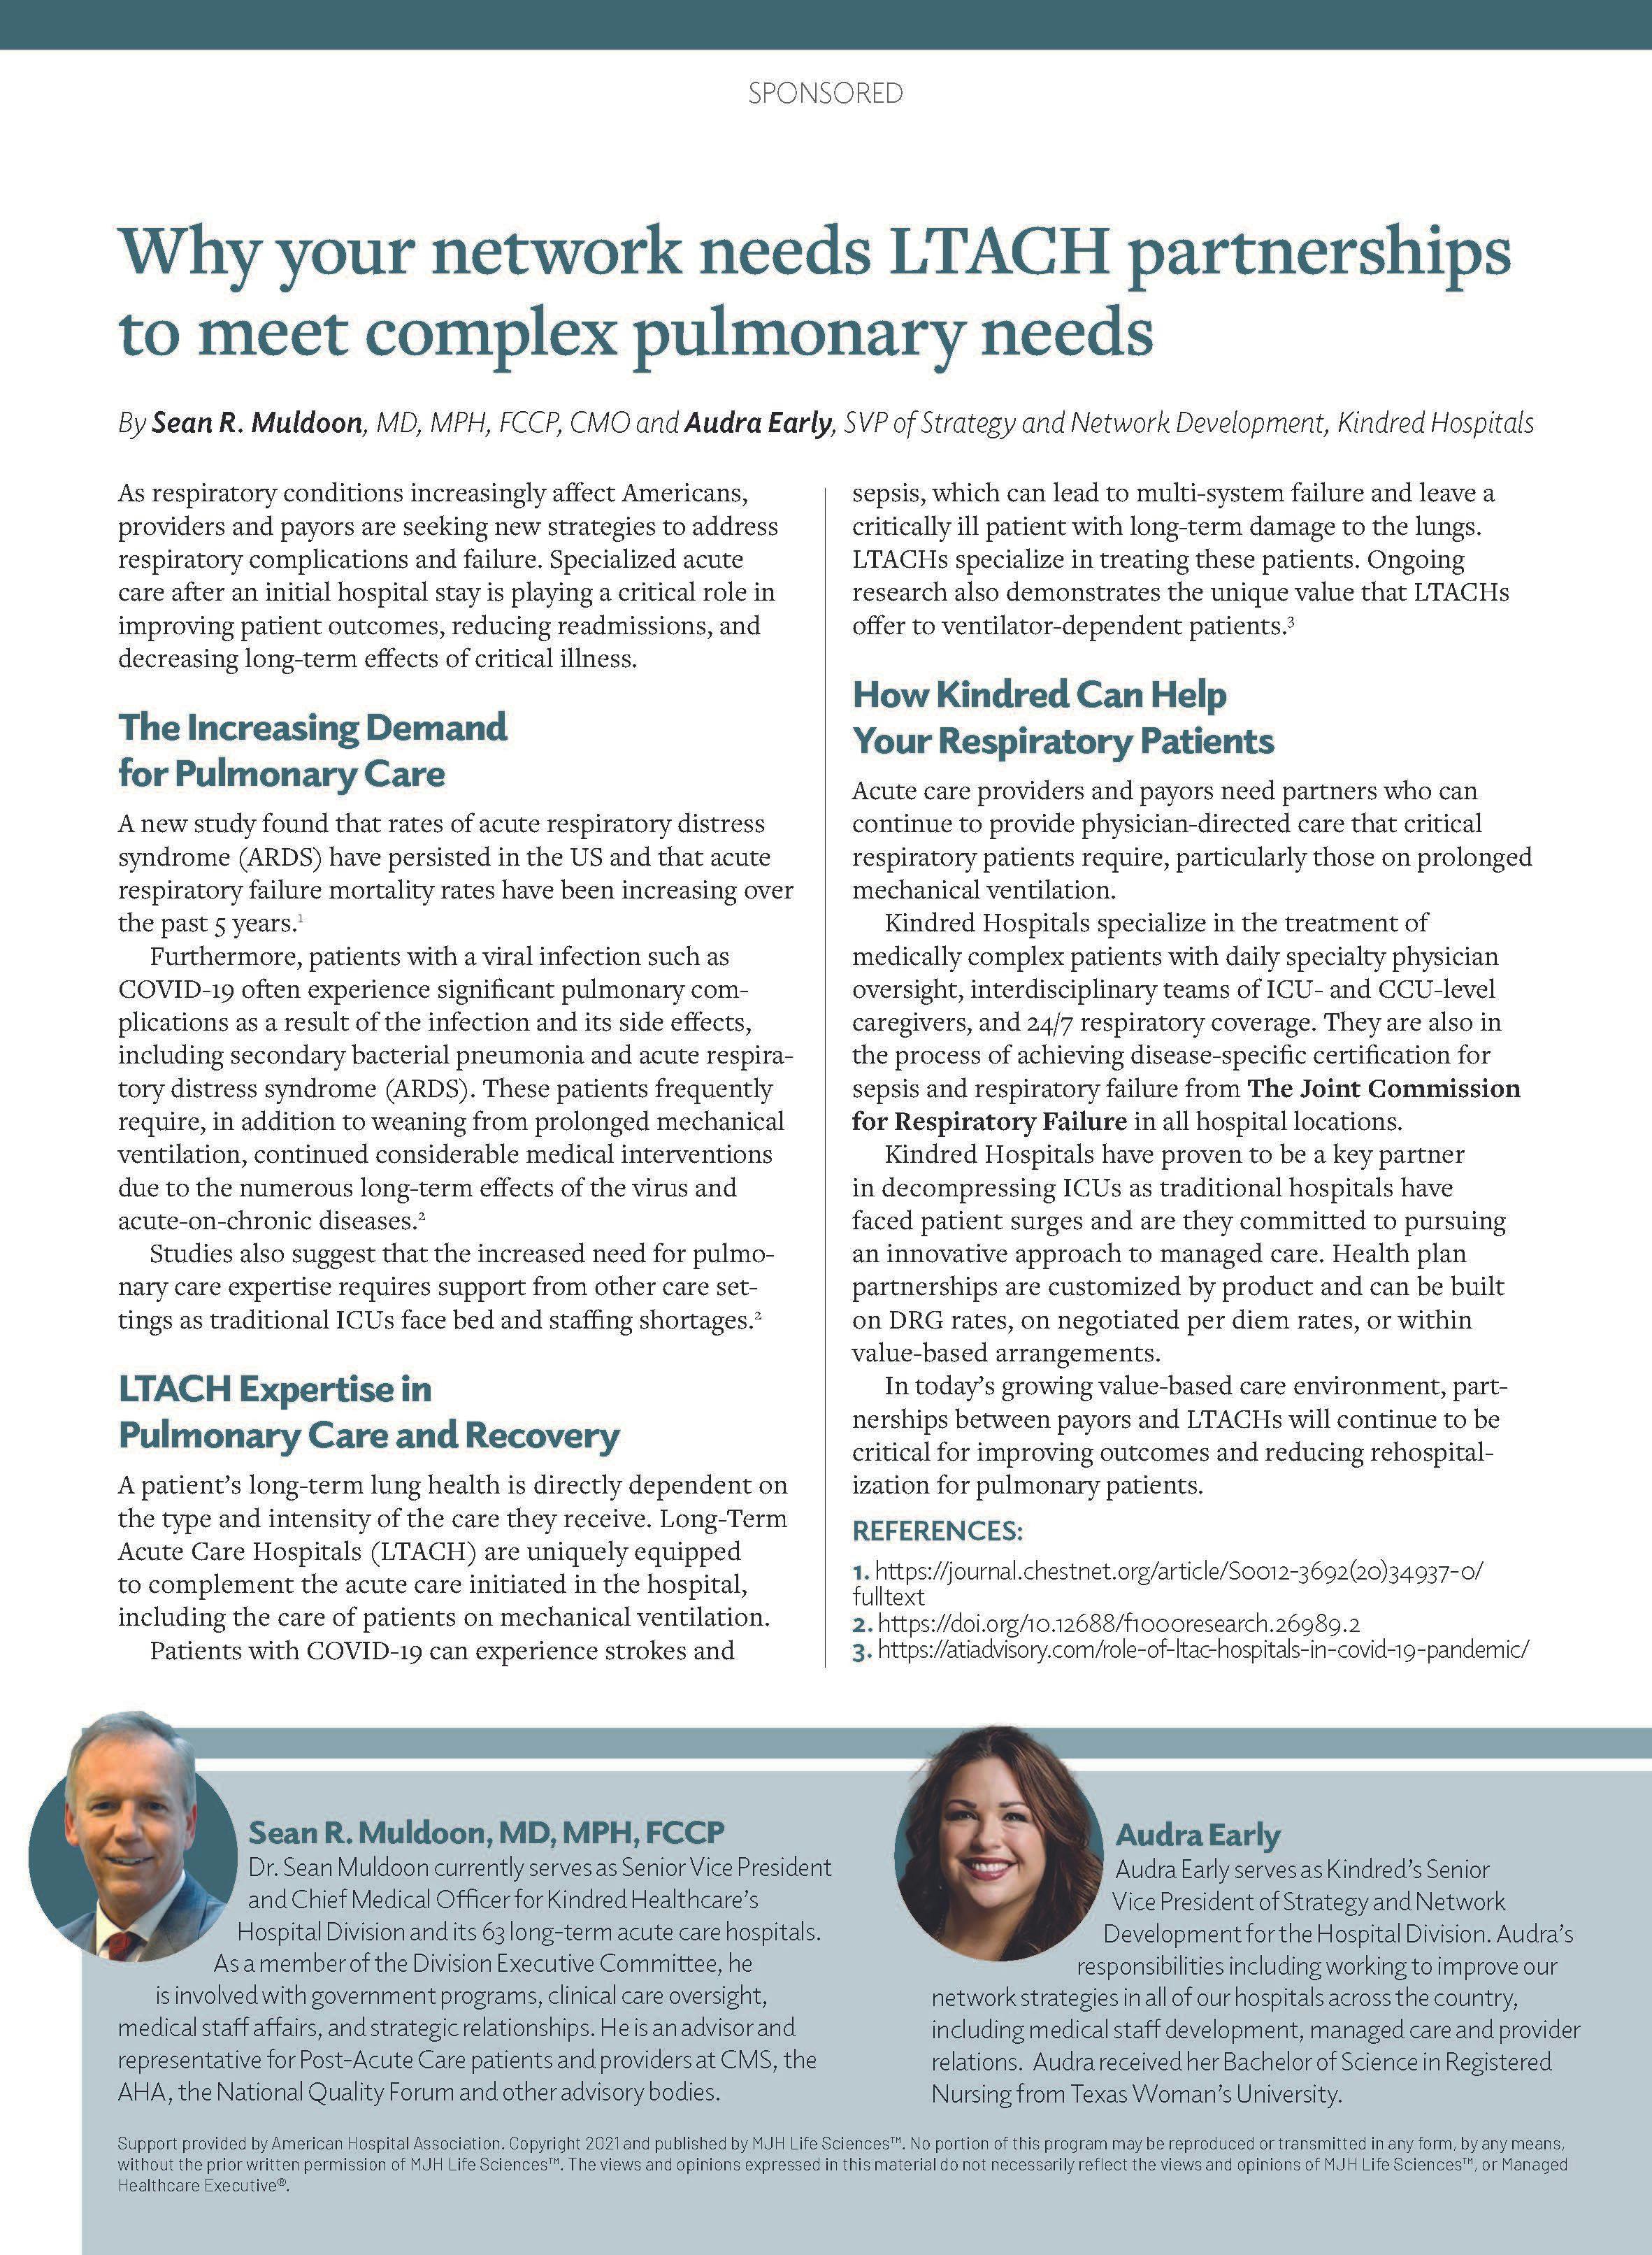 Advertorial: Why Your Network Needs LTACH Partnerships to Meet Complex Pulmonary Needs